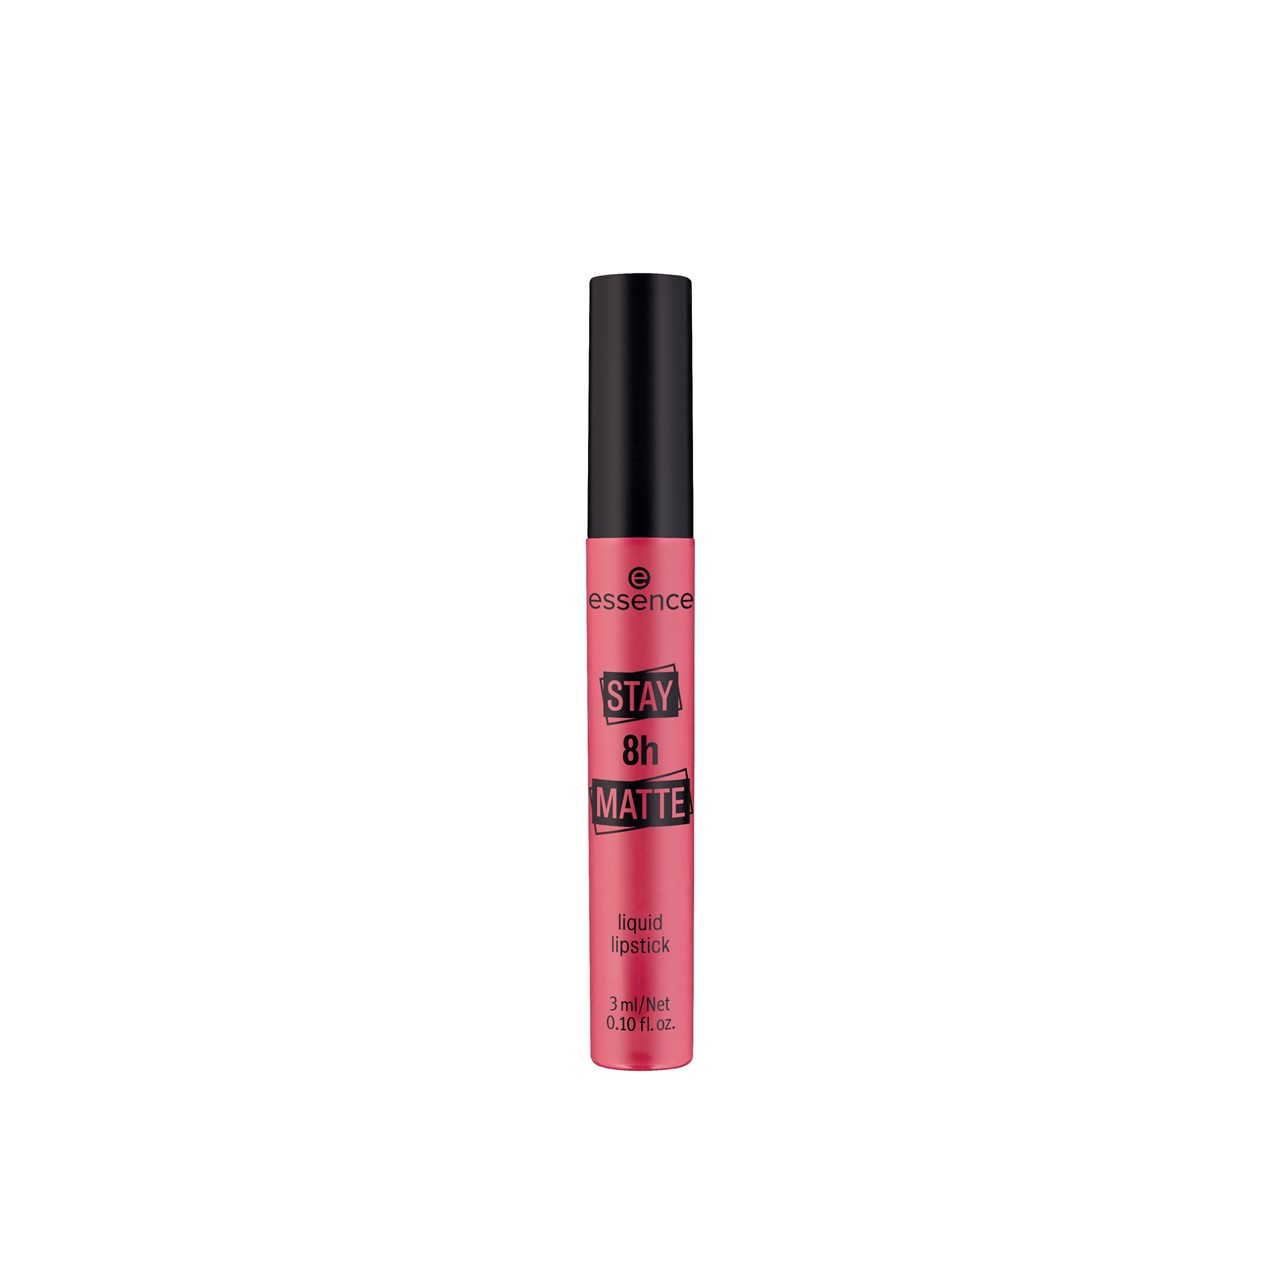 essence Stay 8h Matte Liquid Lipstick 04 Mad About You 3ml